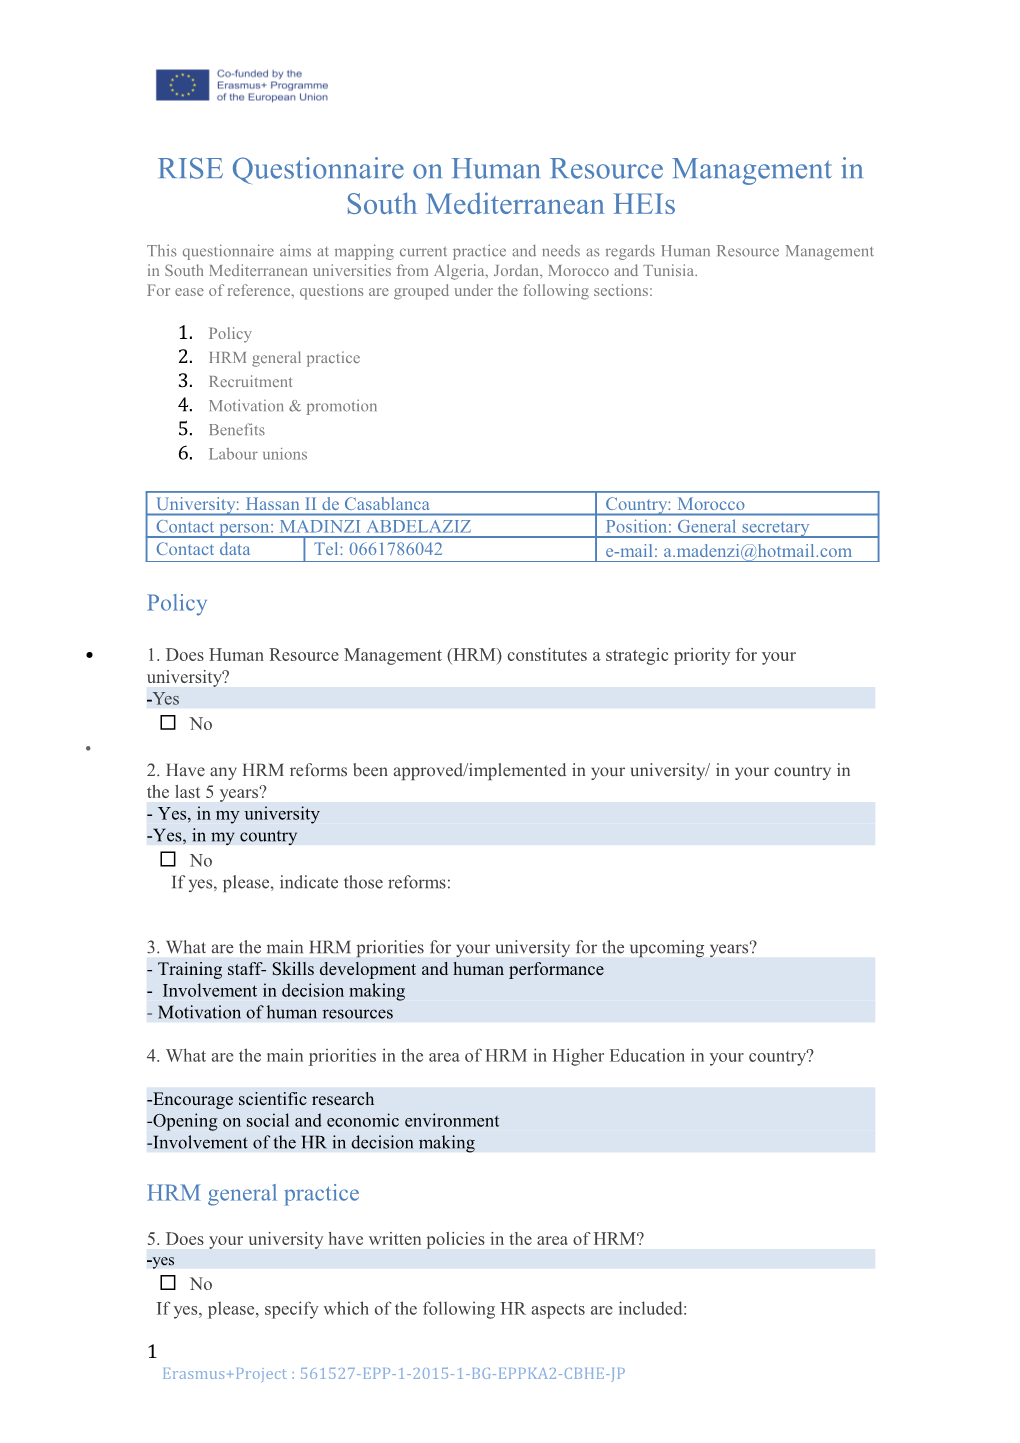 RISE Questionnaire on Human Resource Management in South Mediterranean Heis